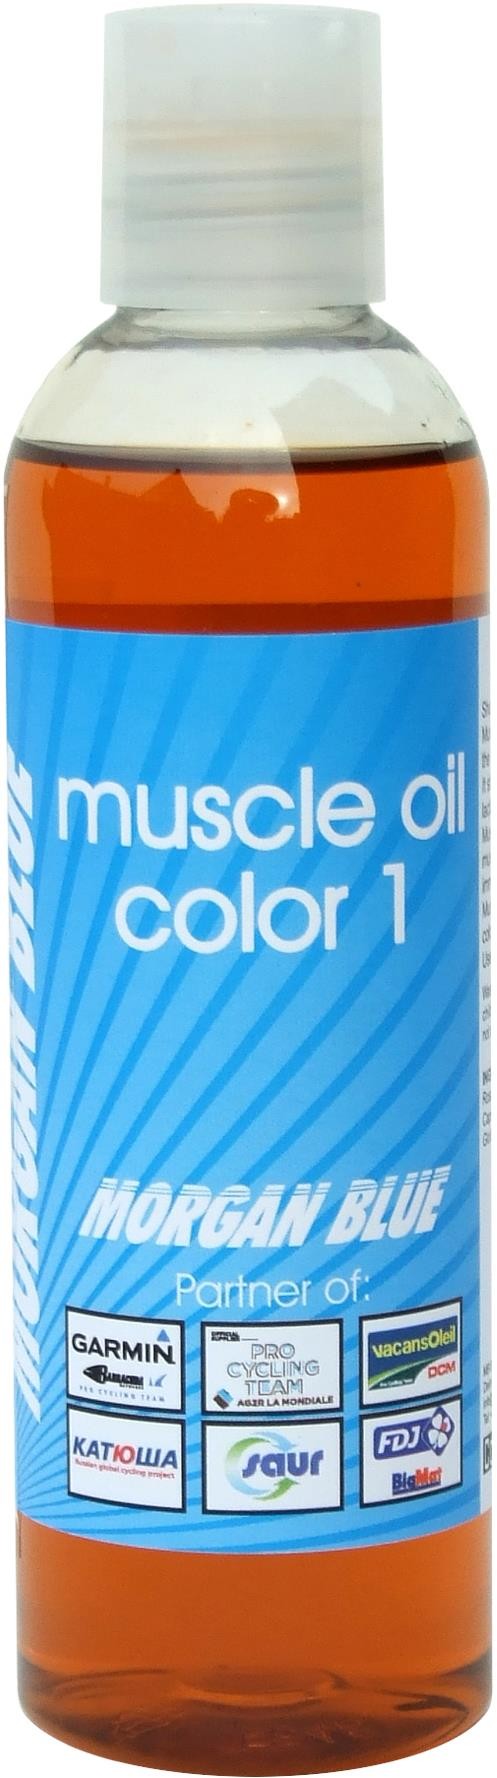 Muscle Oil Color 1 image 0